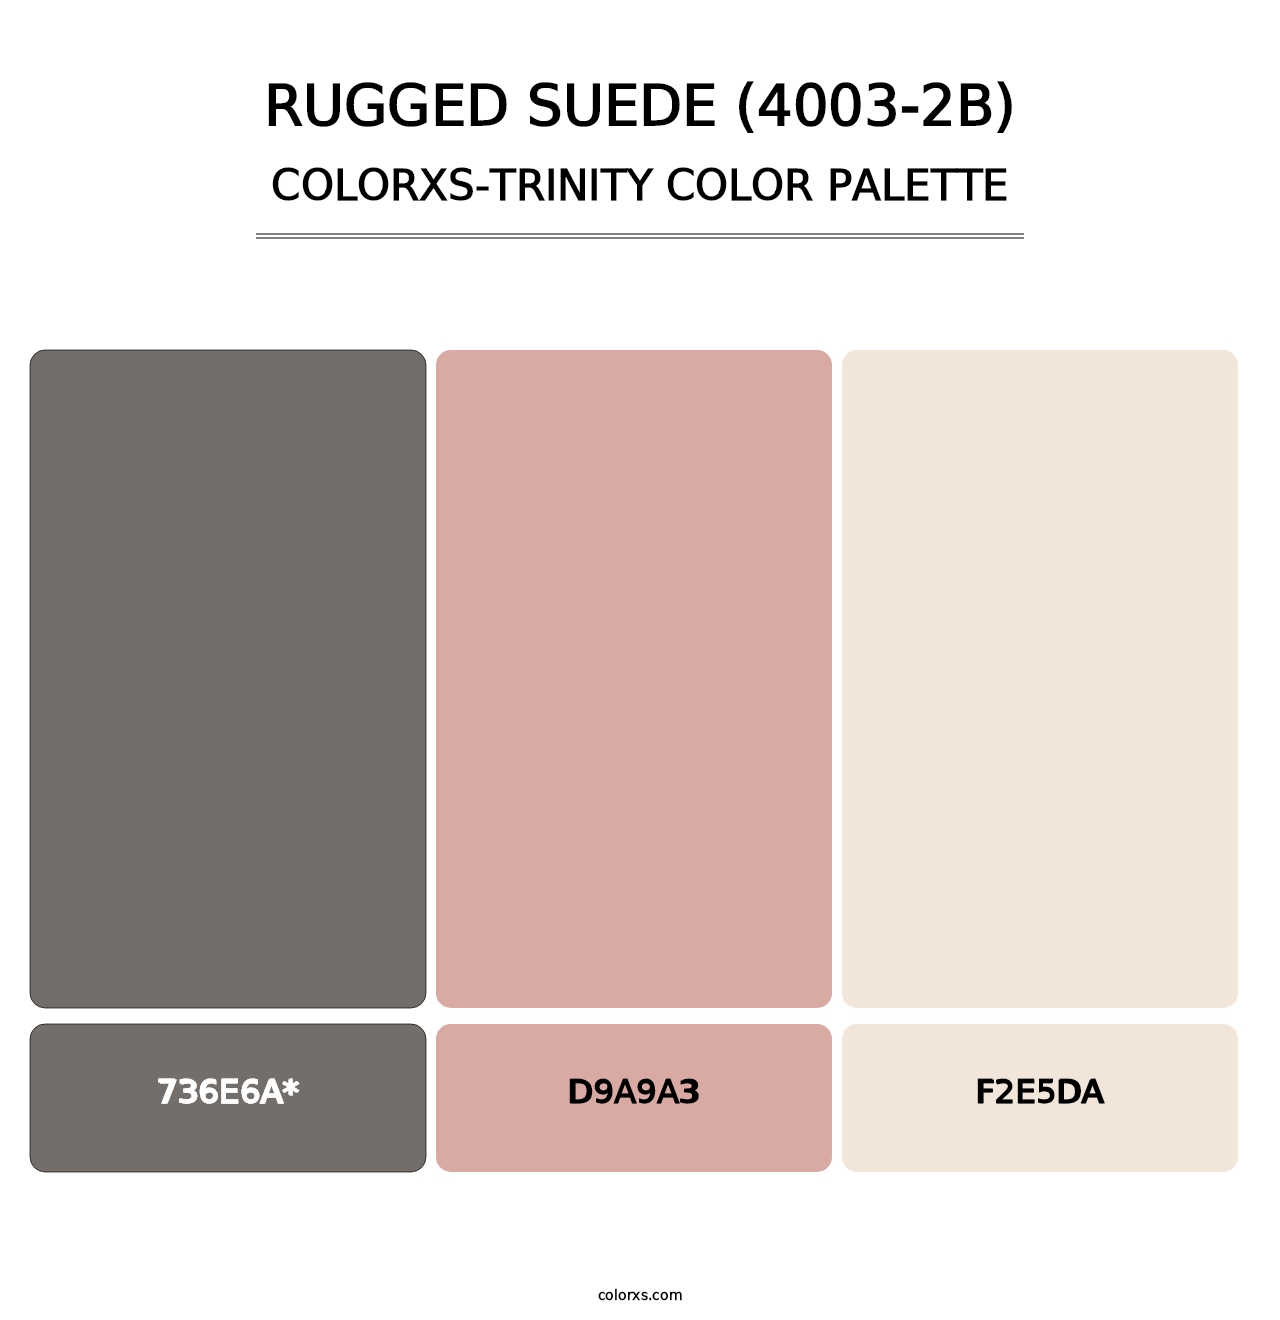 Rugged Suede (4003-2B) - Colorxs Trinity Palette